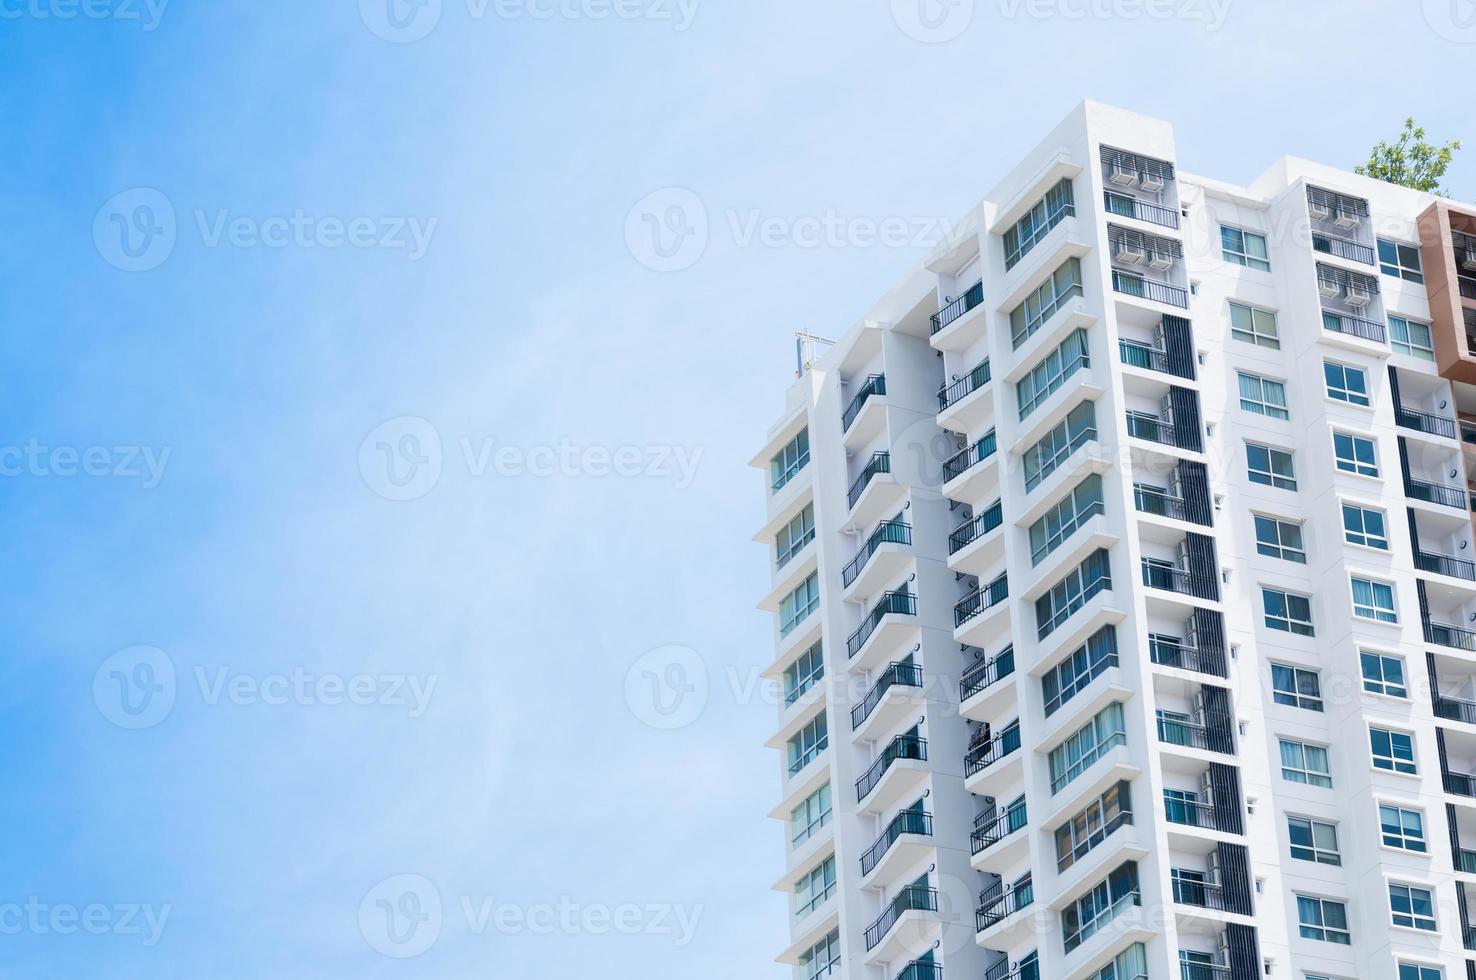 New building architecture on blue sky background,Low angle architectural exterior view of modern photo